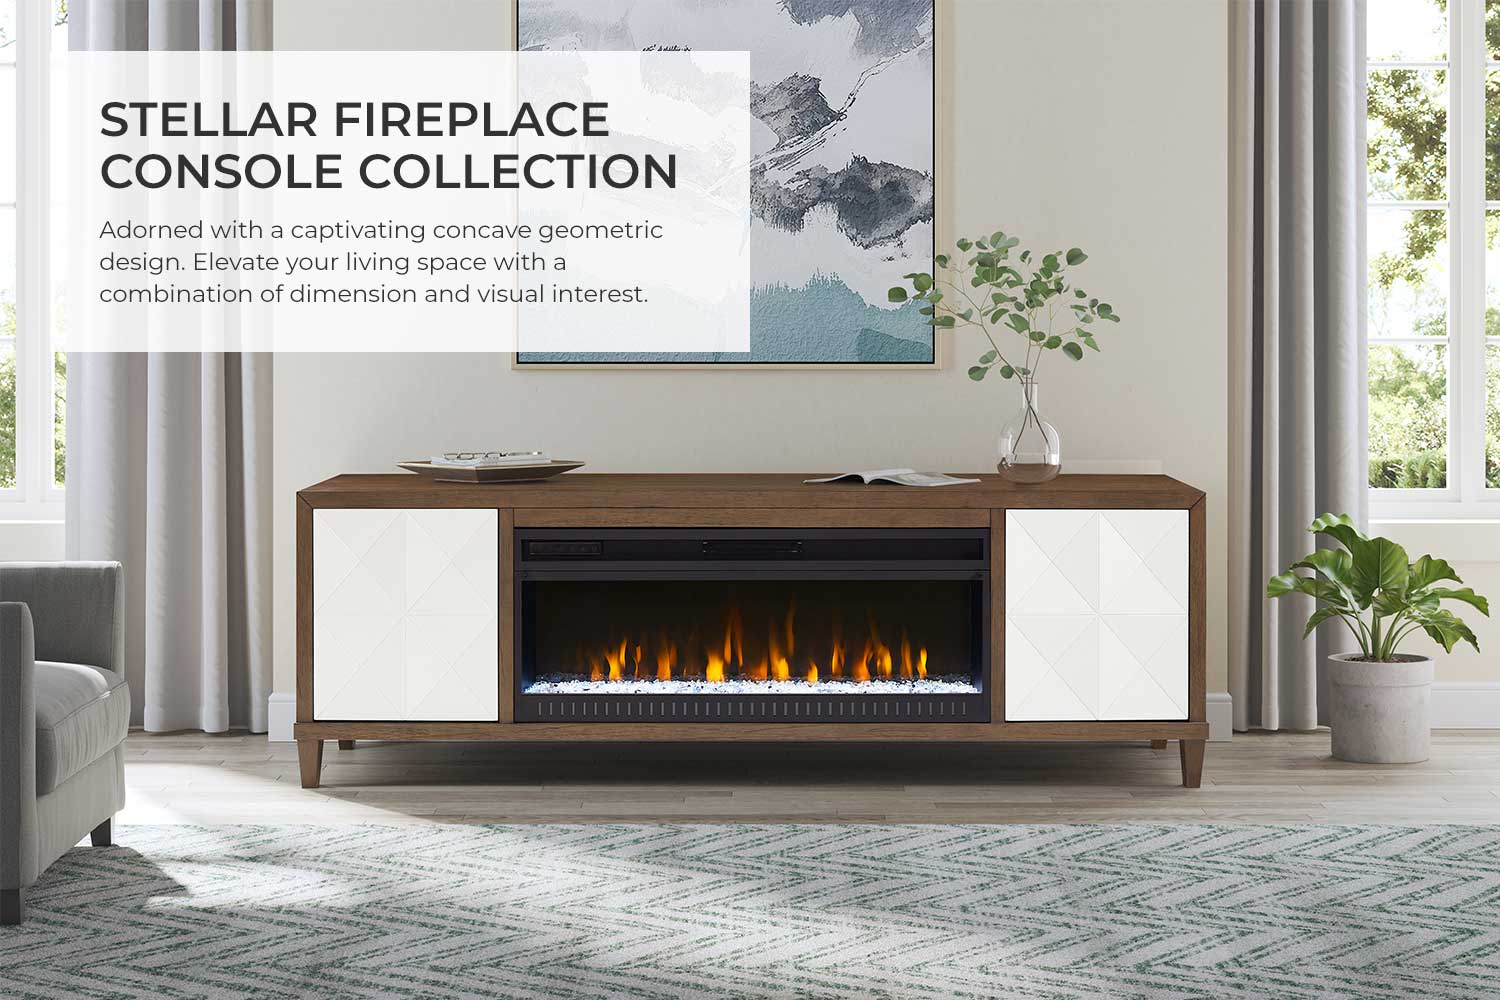 Stellar Fireplace Console Collection